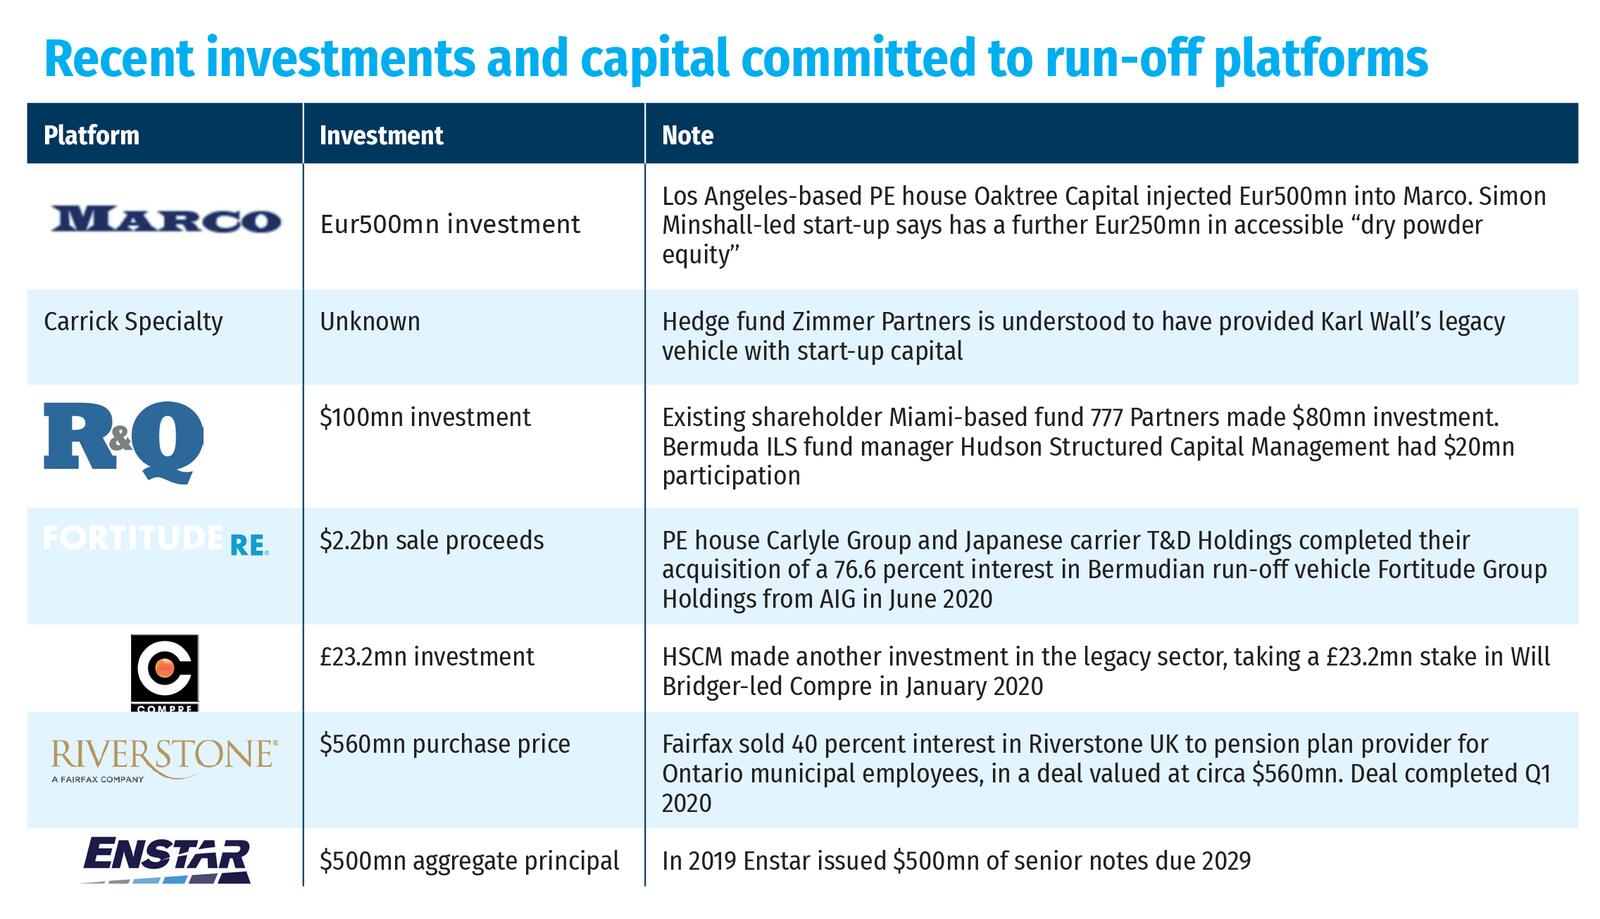 Recent investments and capital committed to run-off platforms